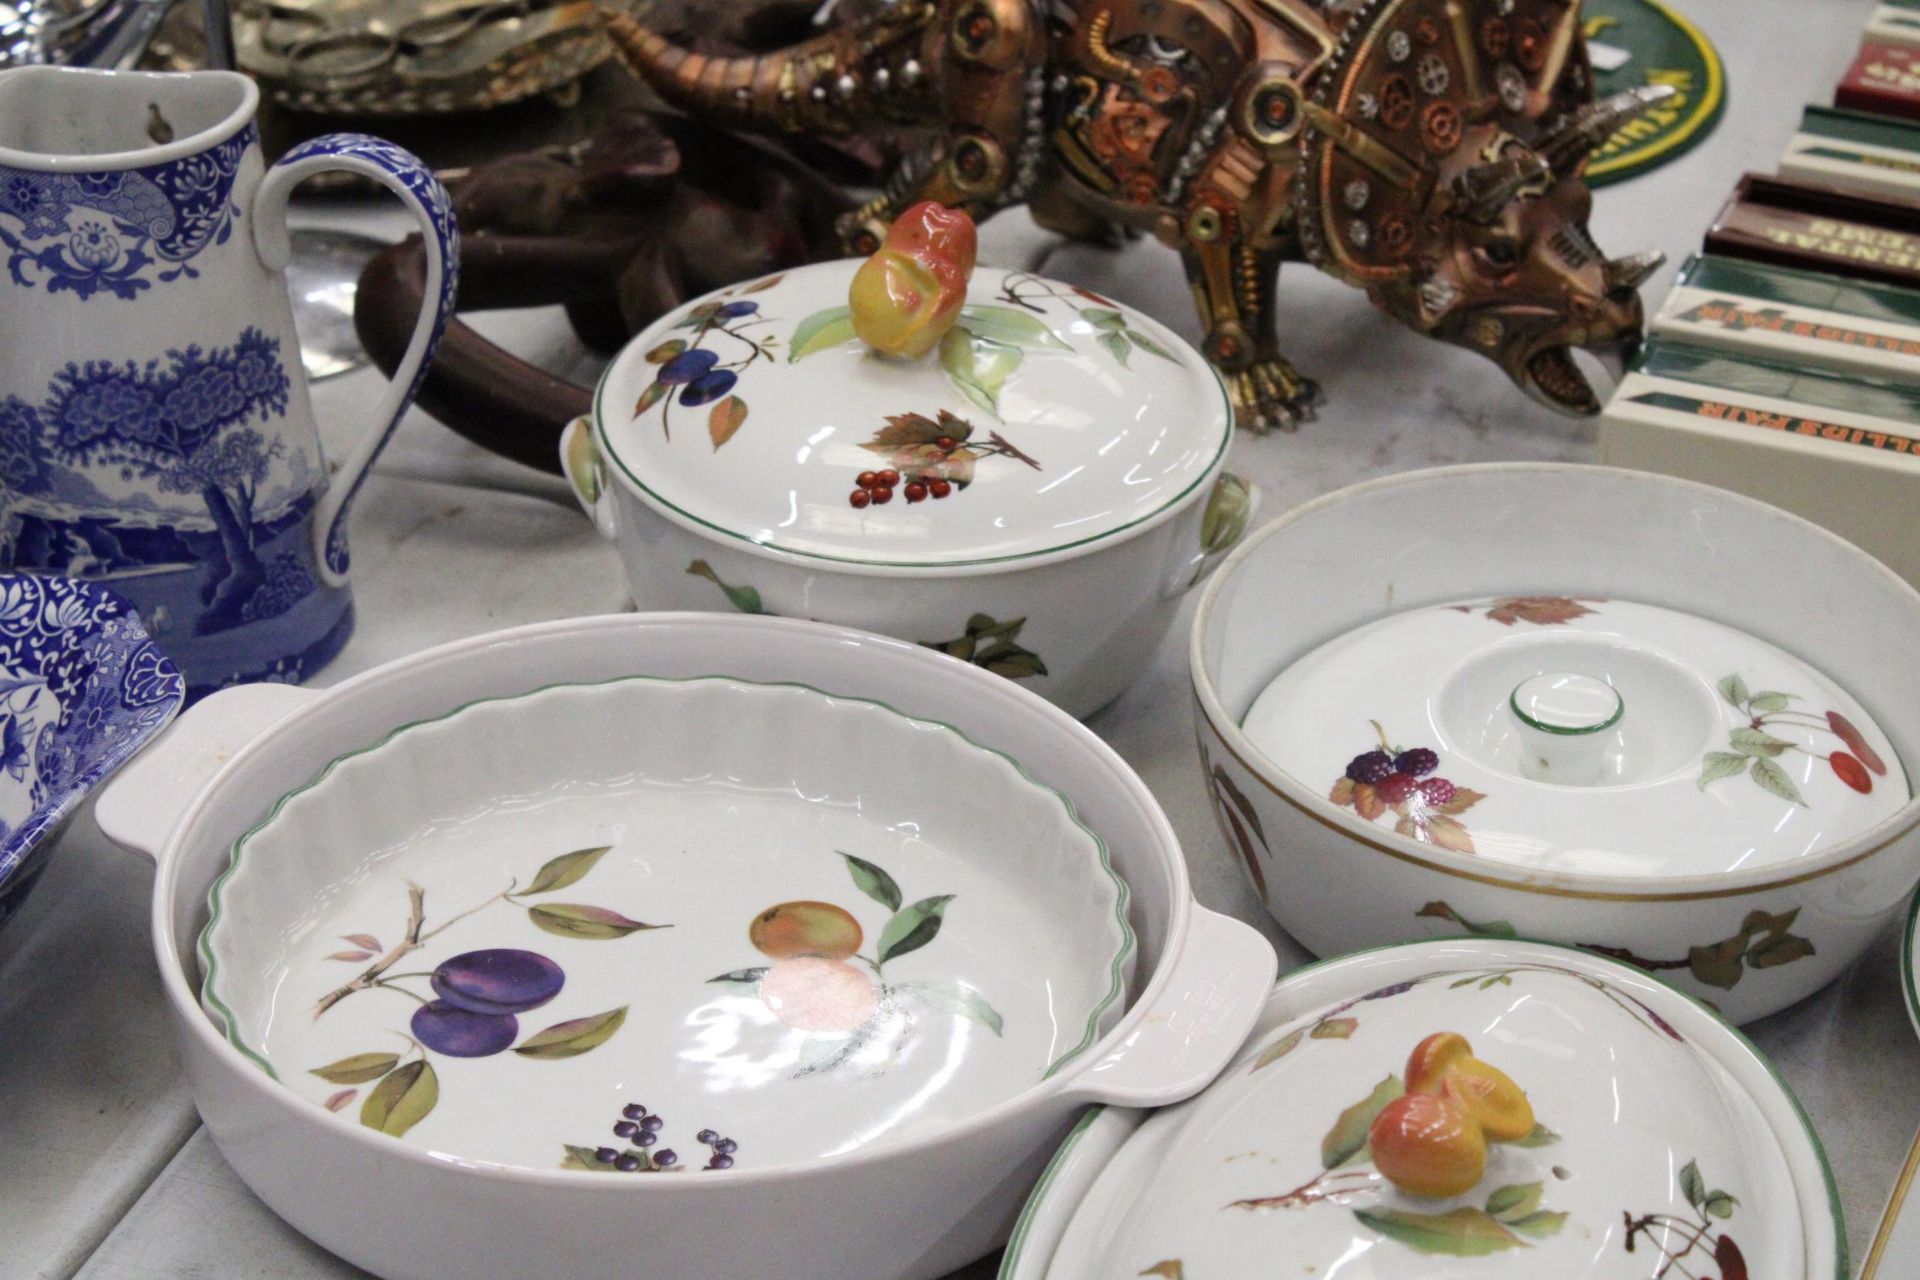 A QUANTITY OF ROYAL WORCESTER WARE TO INCLUDE PLATES, DISHES, PRESERVES JAR ETC - Image 6 of 7